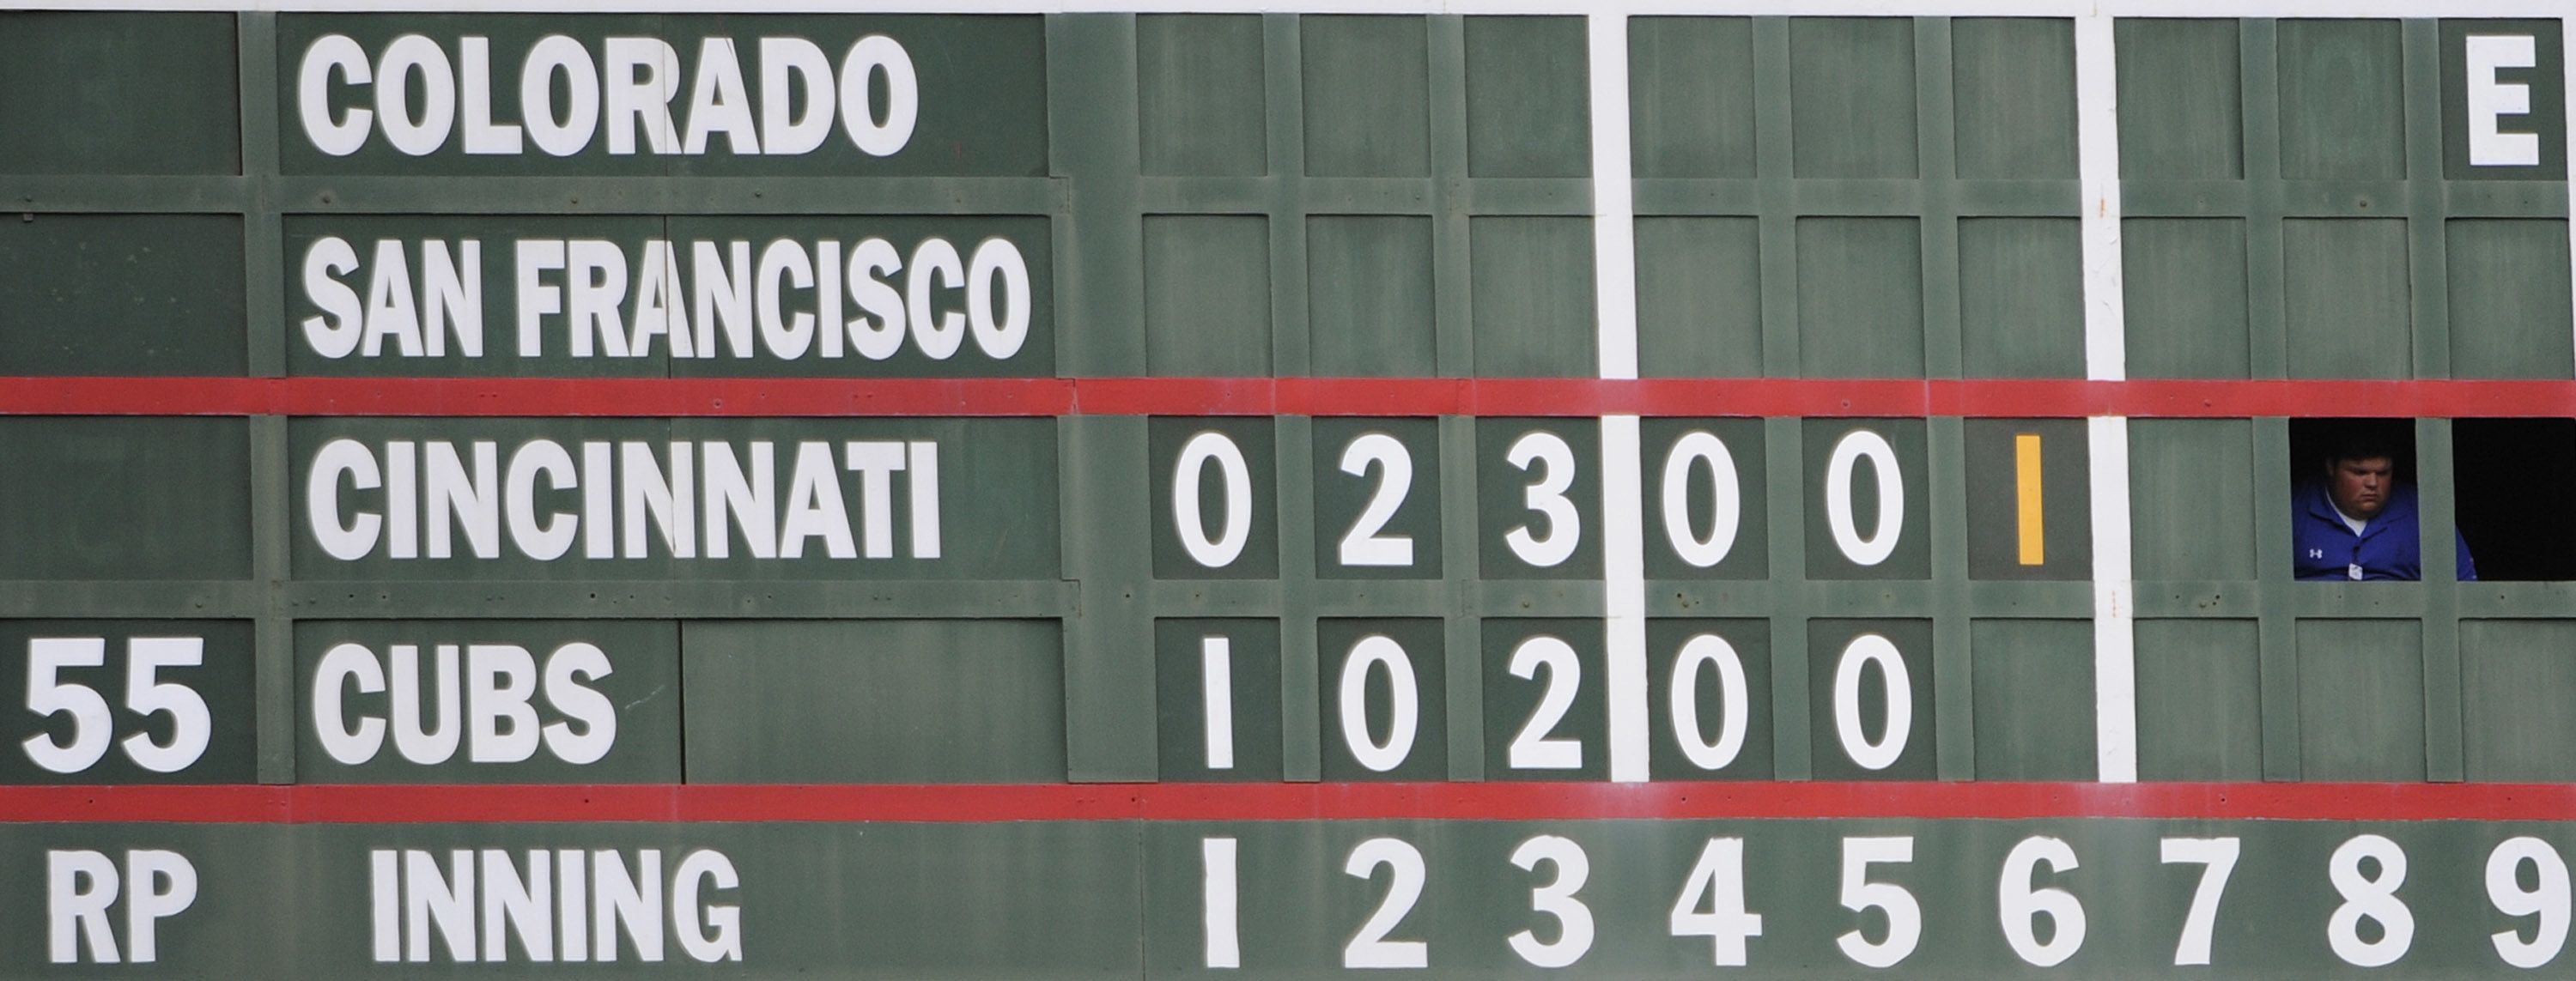 Offseason trivia. Based on the out of town scoreboard at wrigley, what year  was this picture taken? : r/baseball